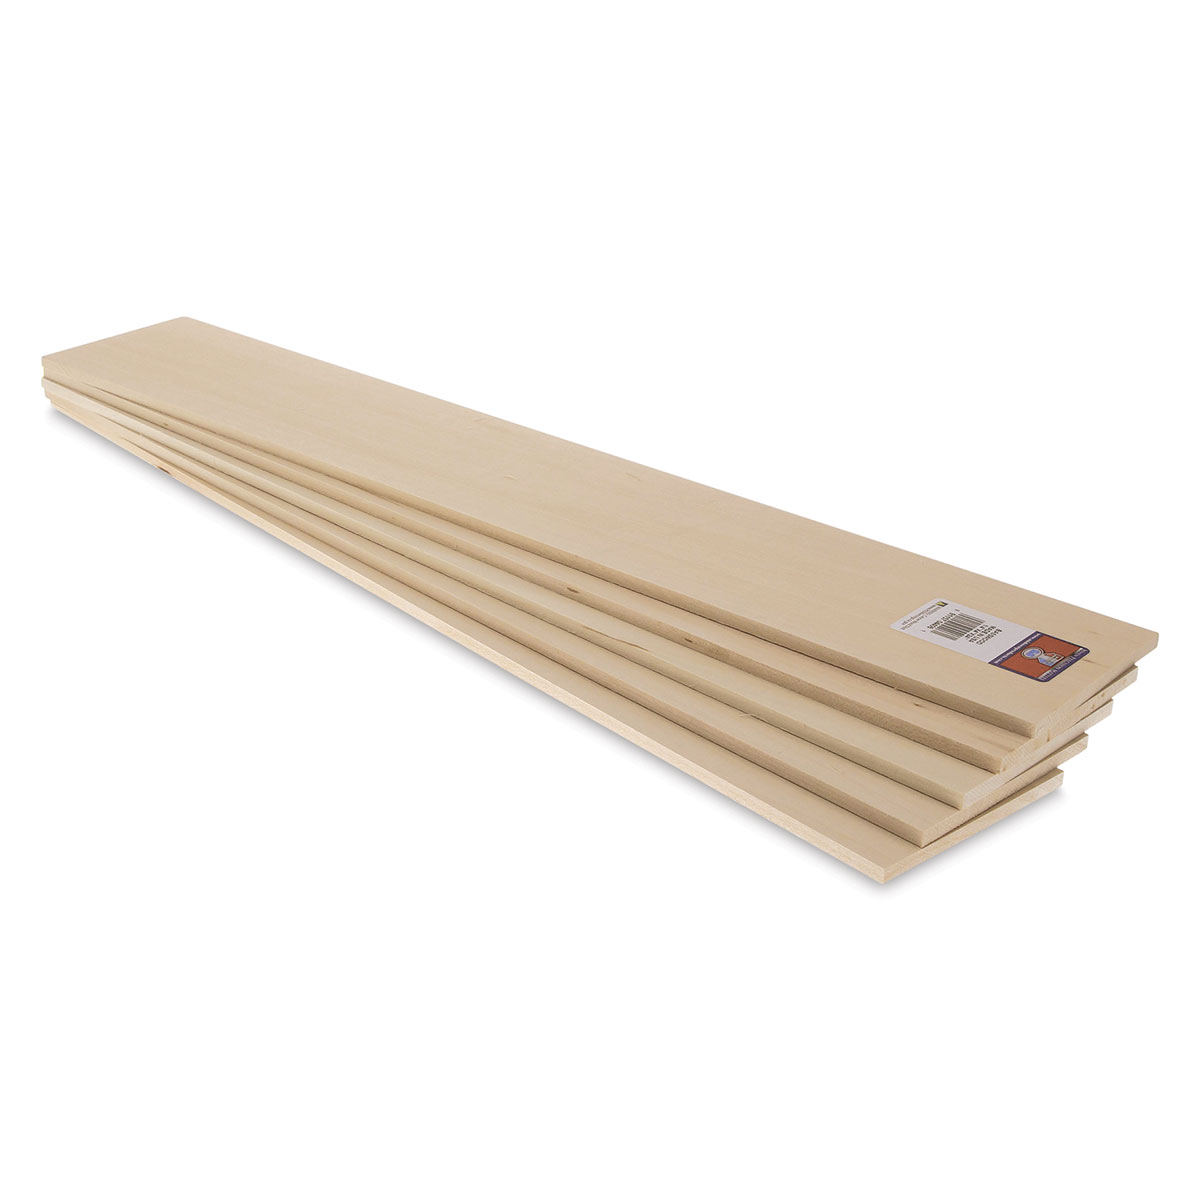 Midwest Products 4406 1/4 x 4 x 24 Basswood Sheet – Trainz